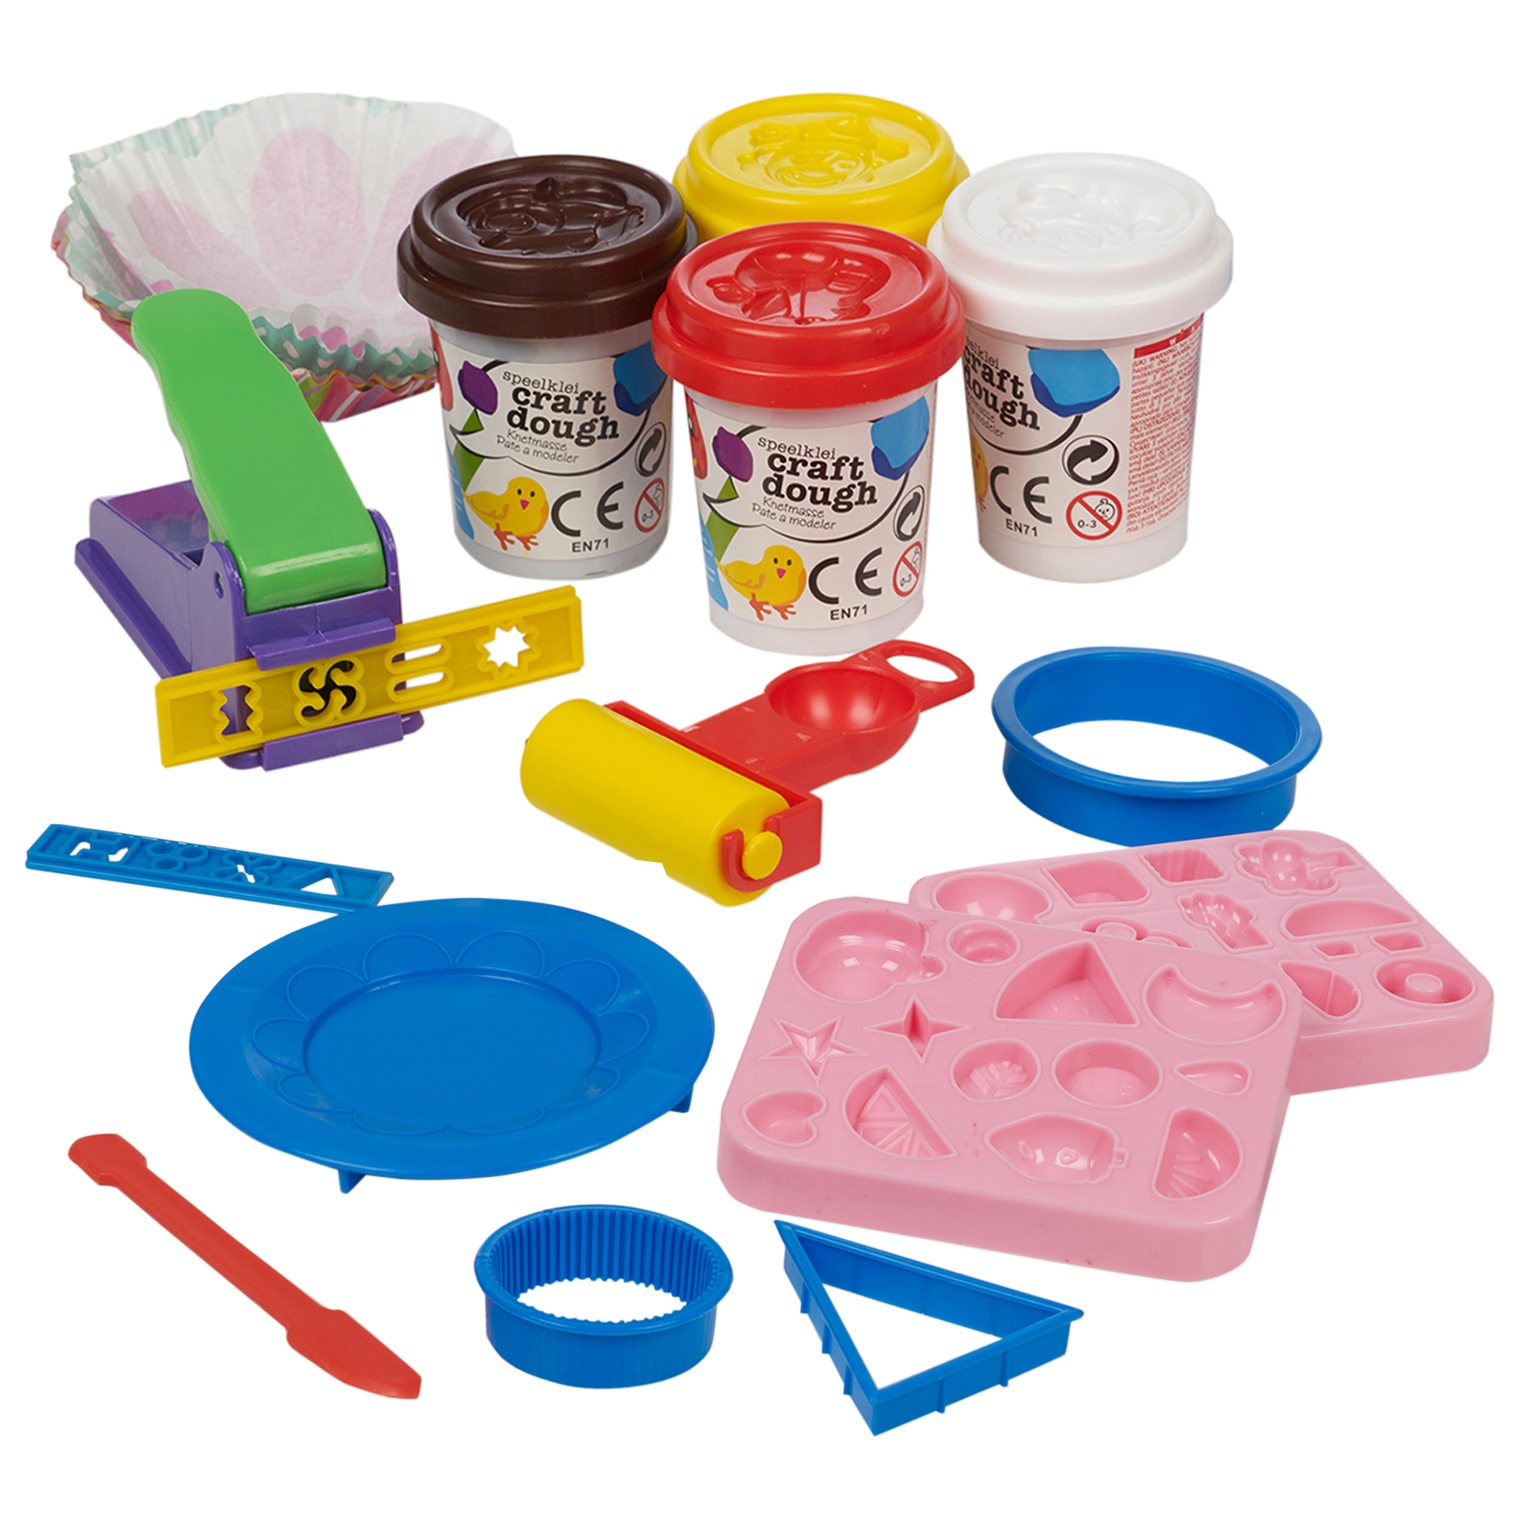 Cake Modelling Play Dough 19pc Kit Tools Accessories Set 4 Tubs Craft ...